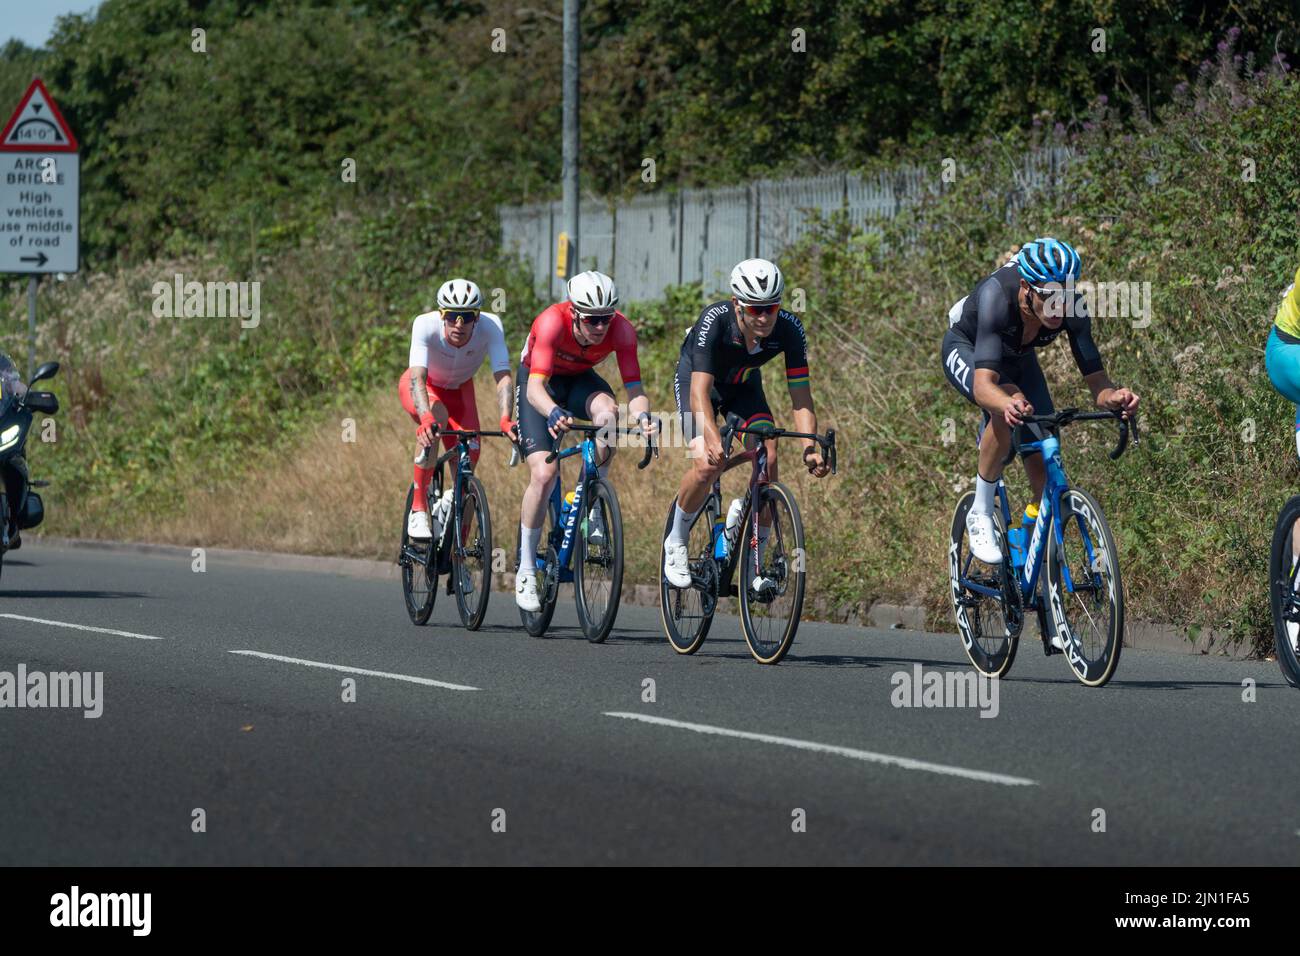 Commonwealth Games 2022 Road Race Cycling Warwick Foto Stock